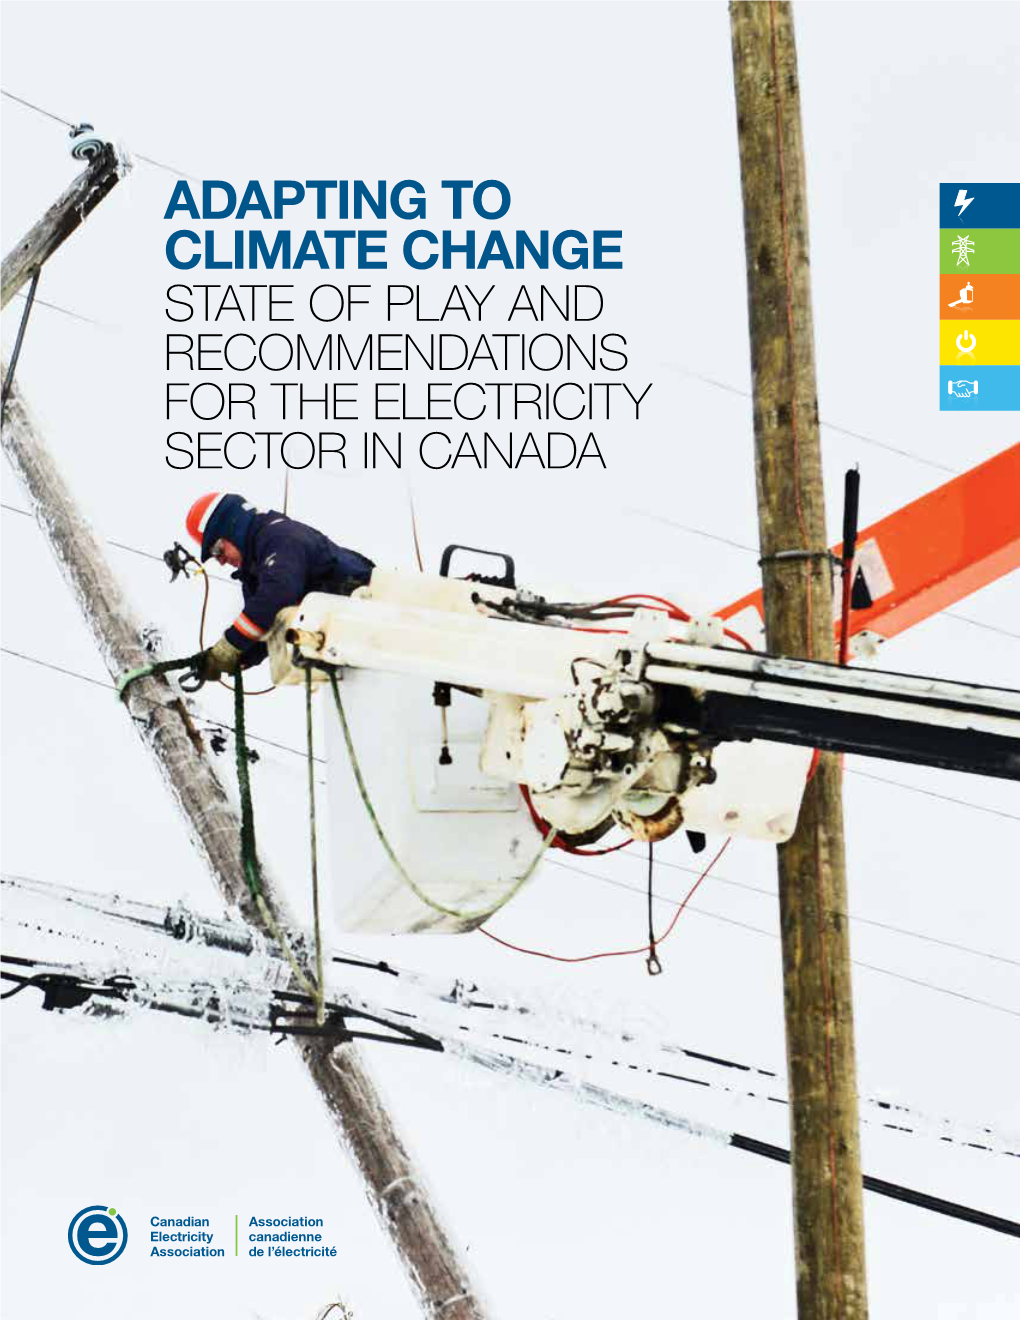 Adapting to Climate Change: State of Play and Recommendations for the Electricity Sector in Canada, 2016